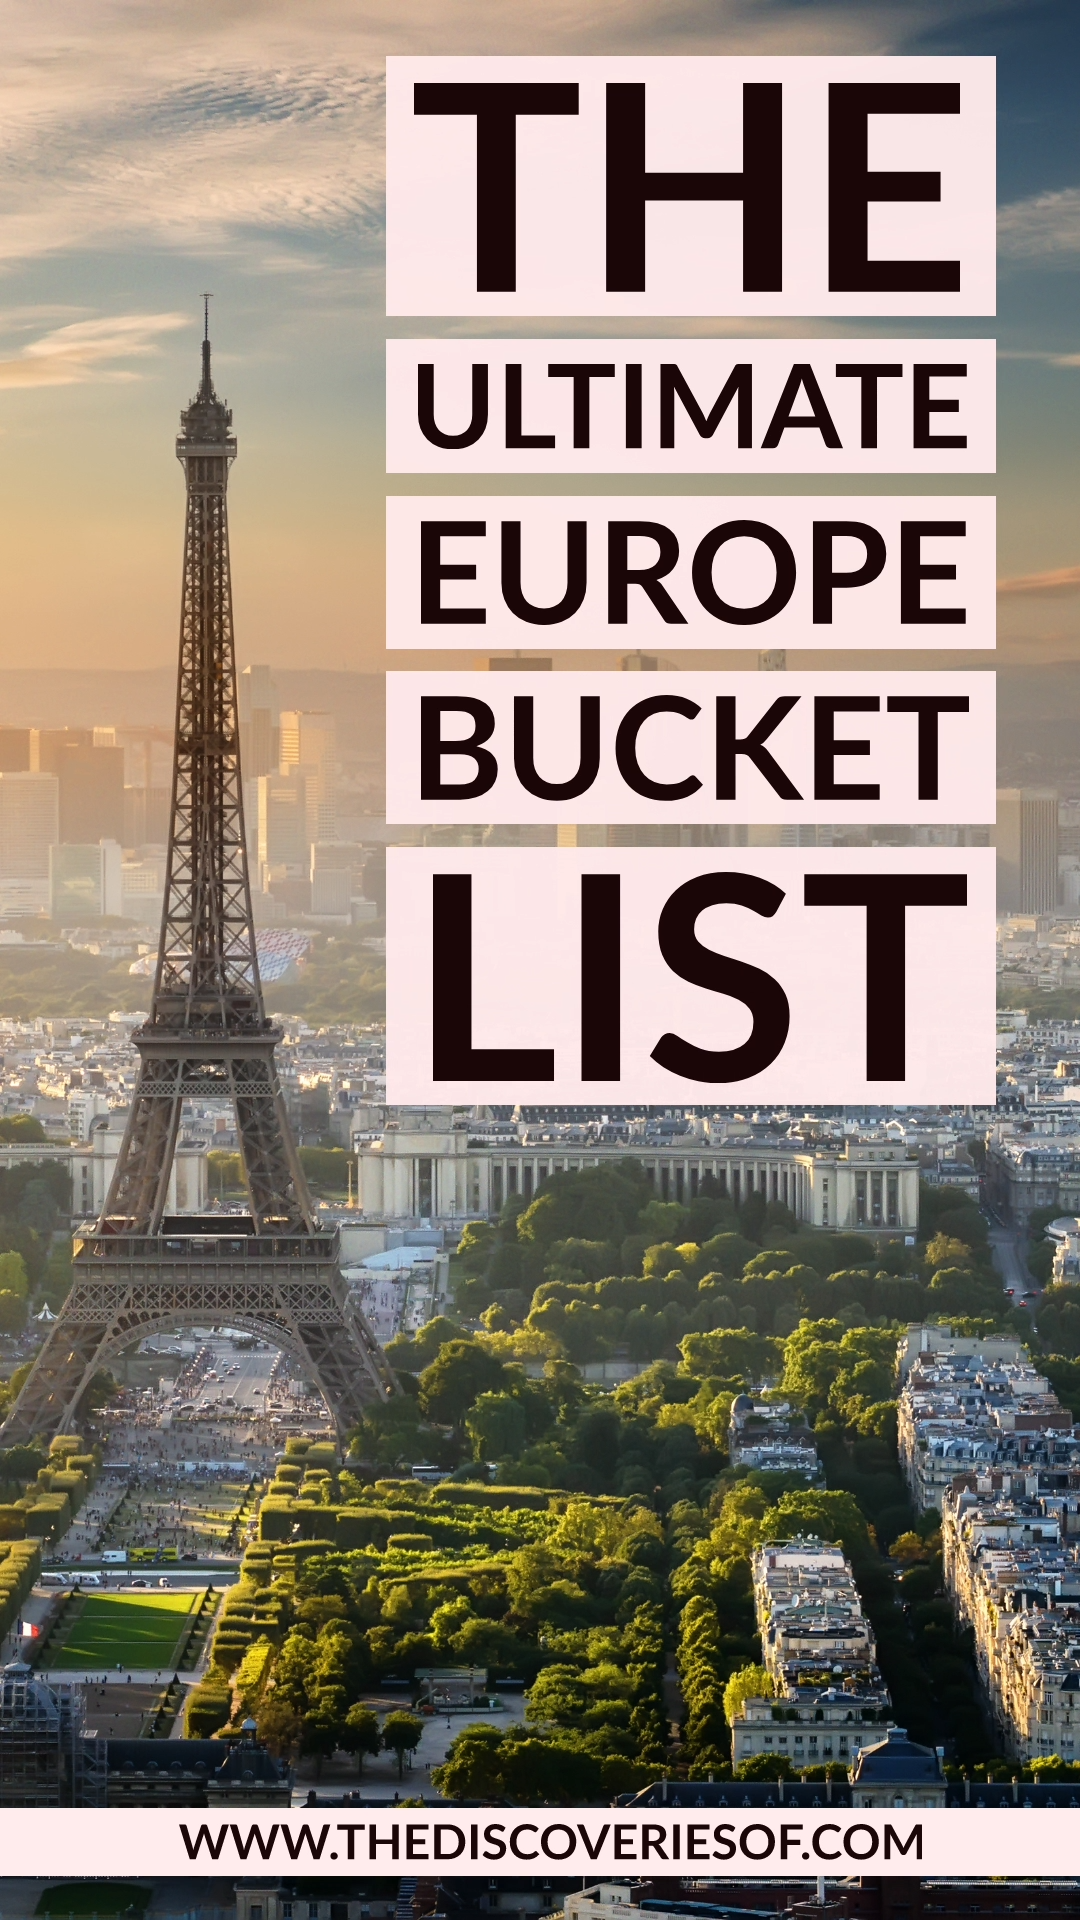 100 Amazing Places to Visit in Europe for your Travel Bucket List -   15 travel destinations Photography cities ideas